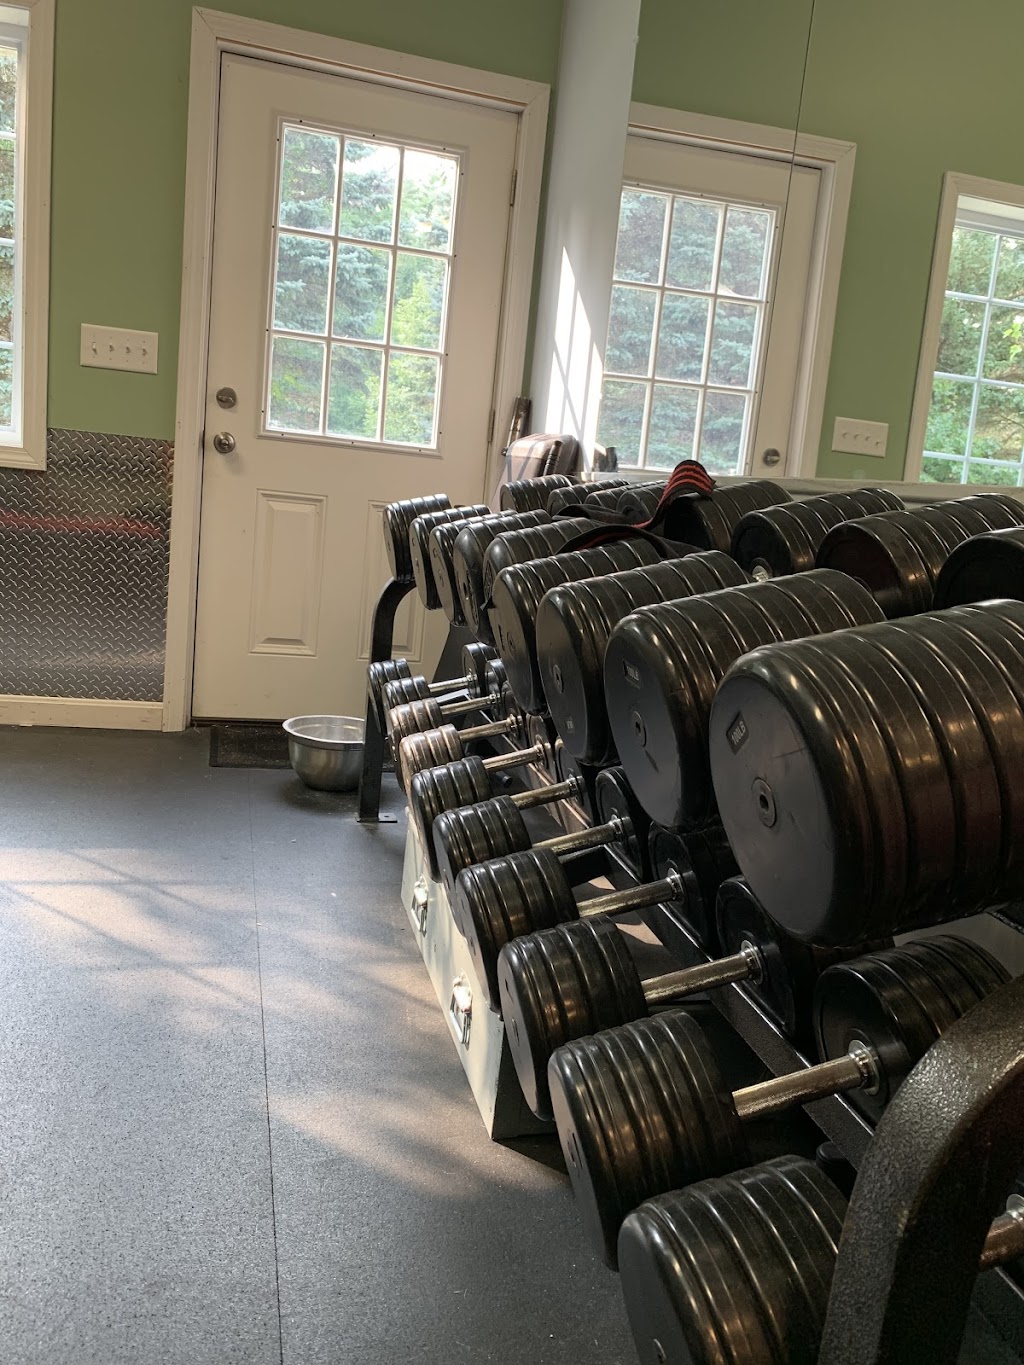 PowerCore Health and Fitness | 96 Lowell Rd, Pepperell, MA 01463, USA | Phone: (978) 807-2722